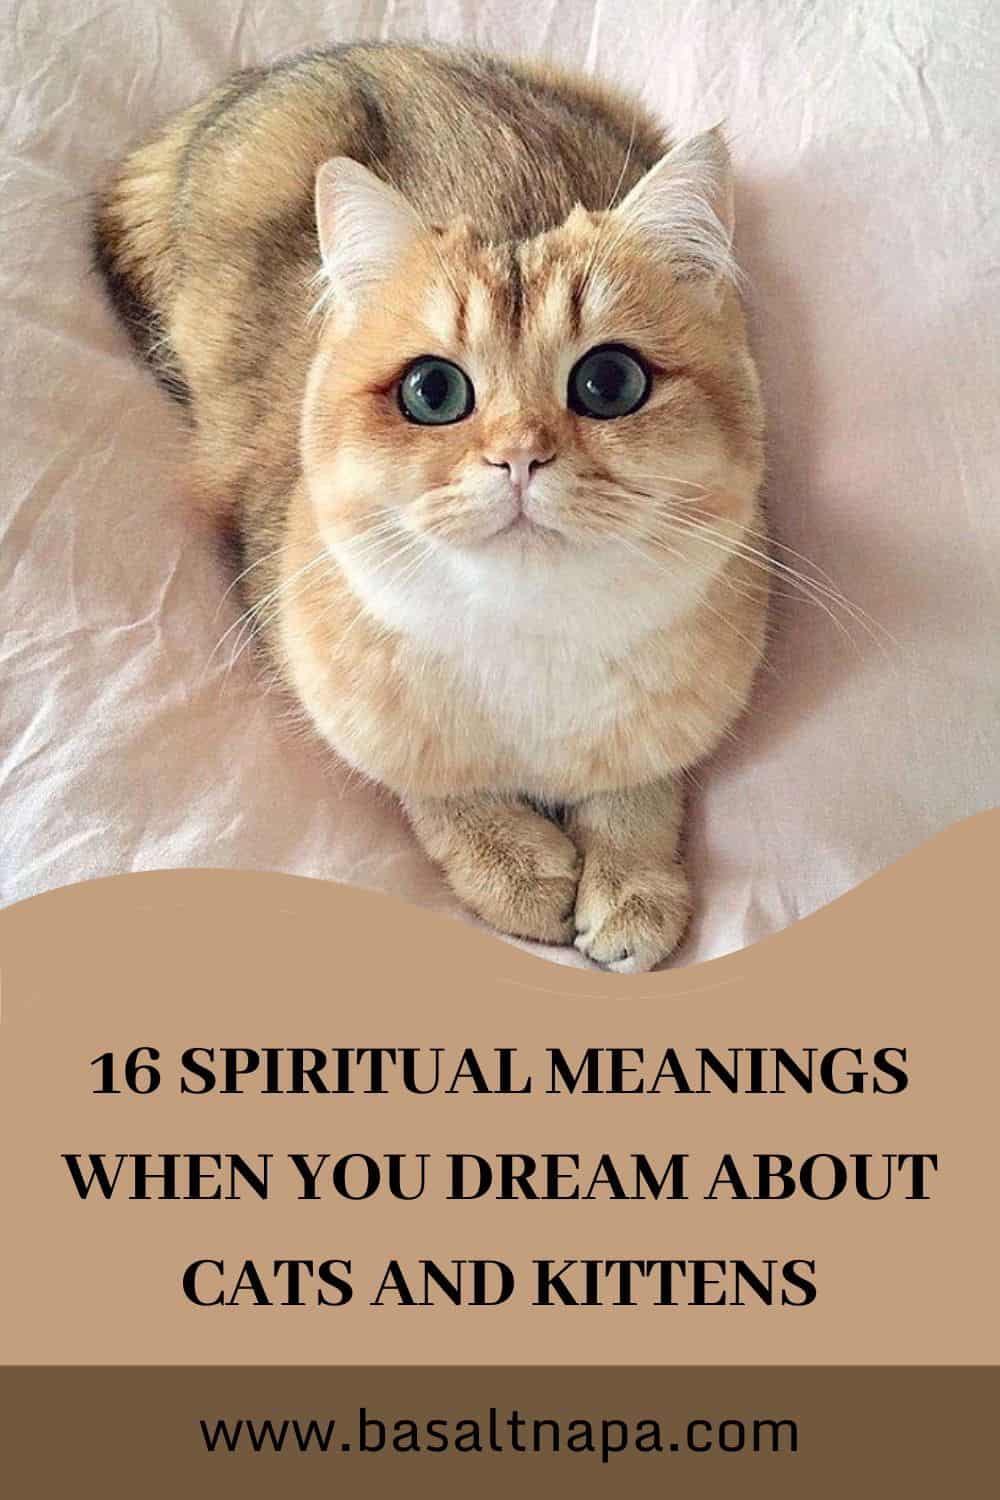 16 Spiritual Meanings When You Dream About Cats and Kittens